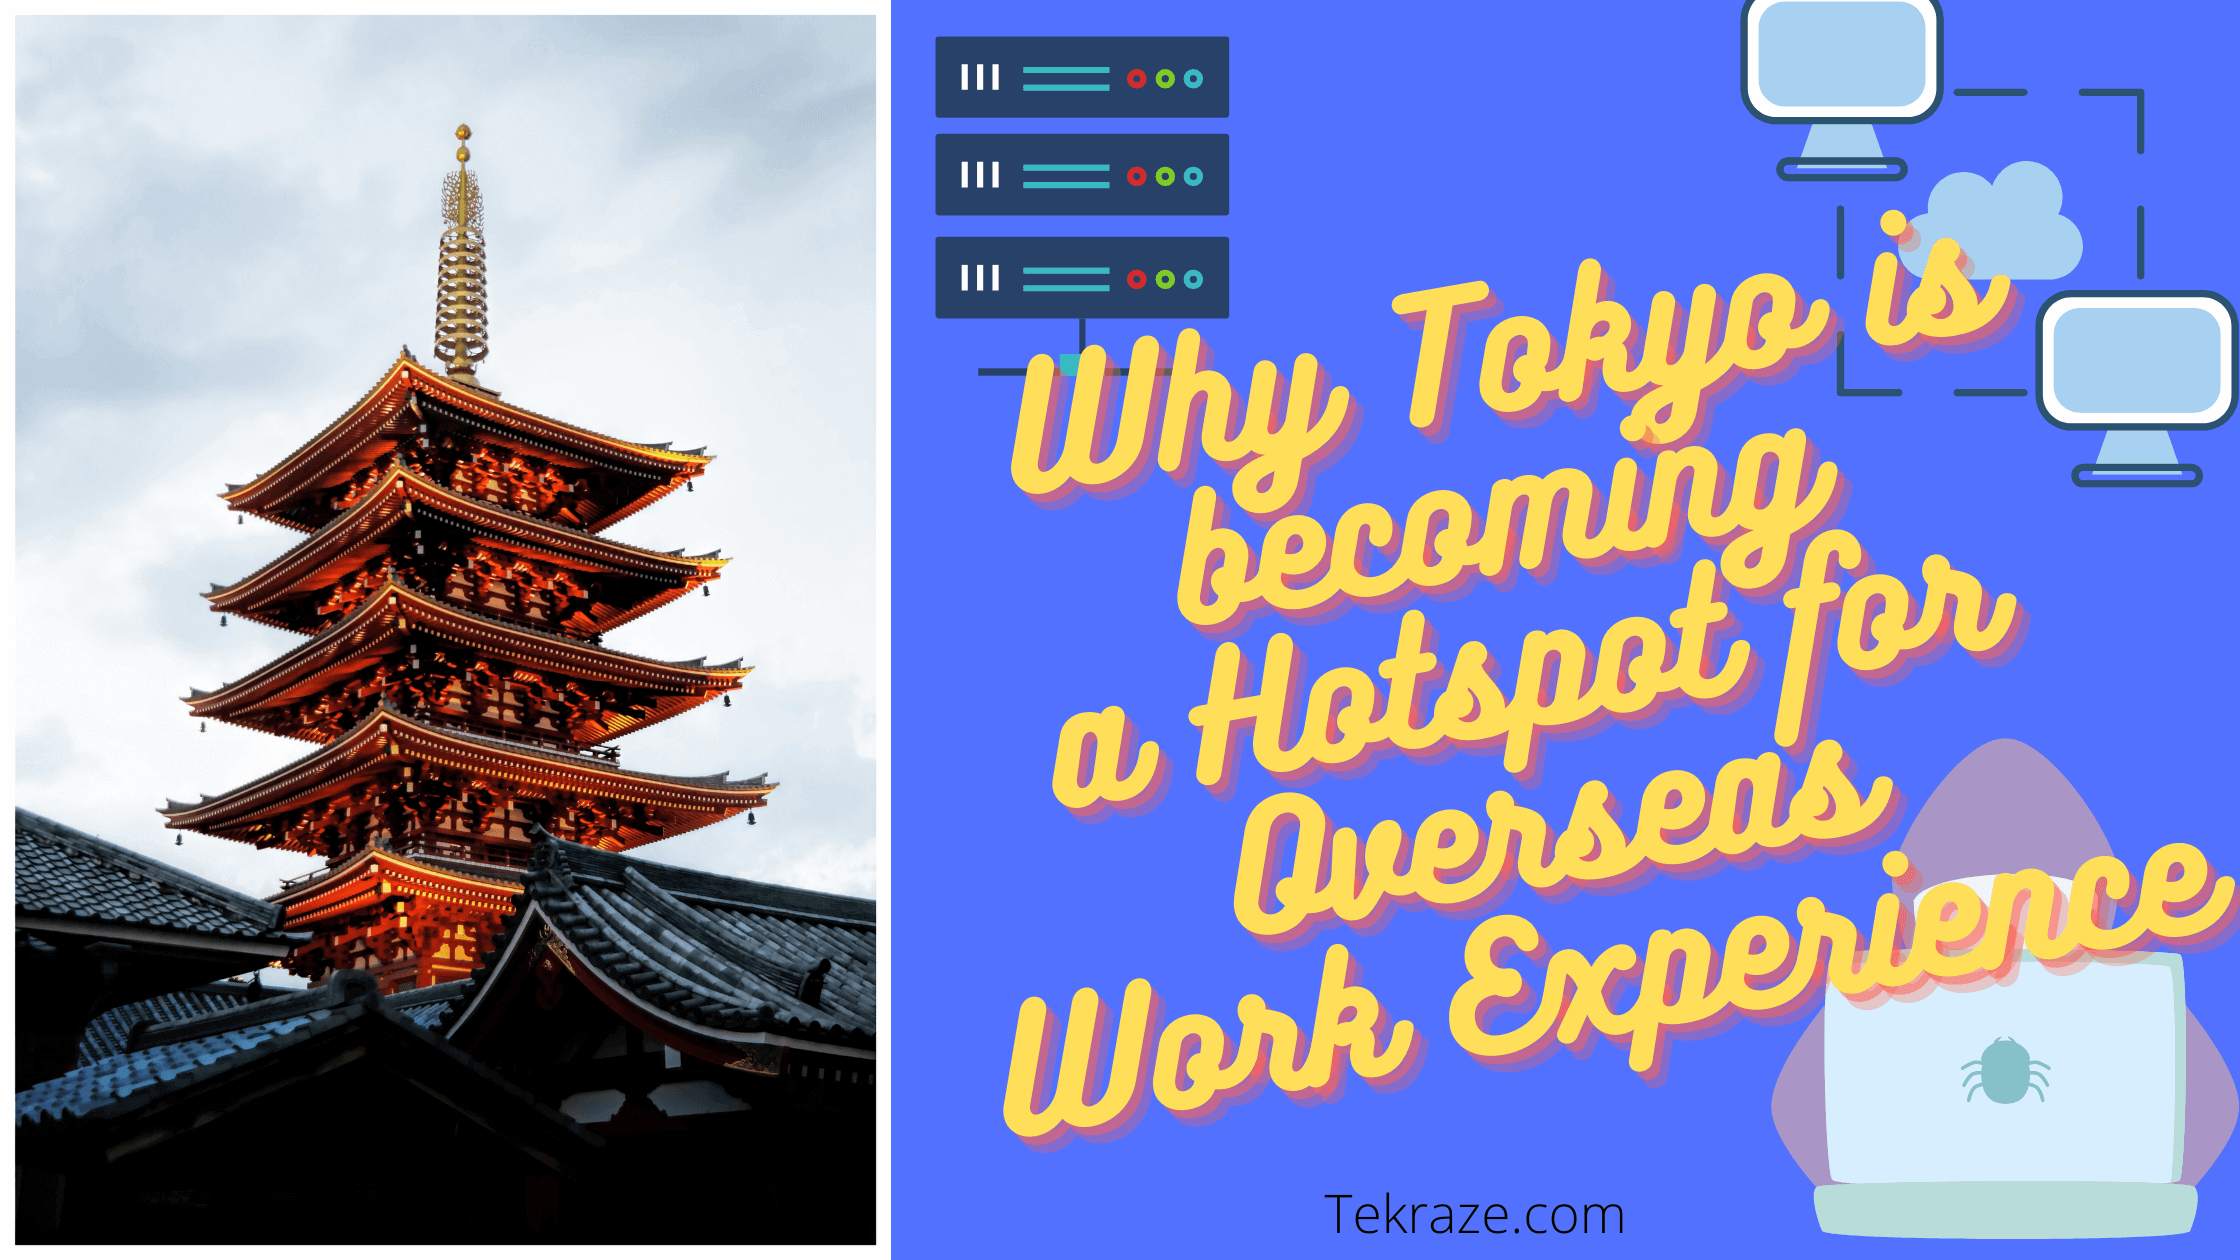 Image of tokyo Showing Why Tokyo is becoming a Hotspot for Overseas Work Experience